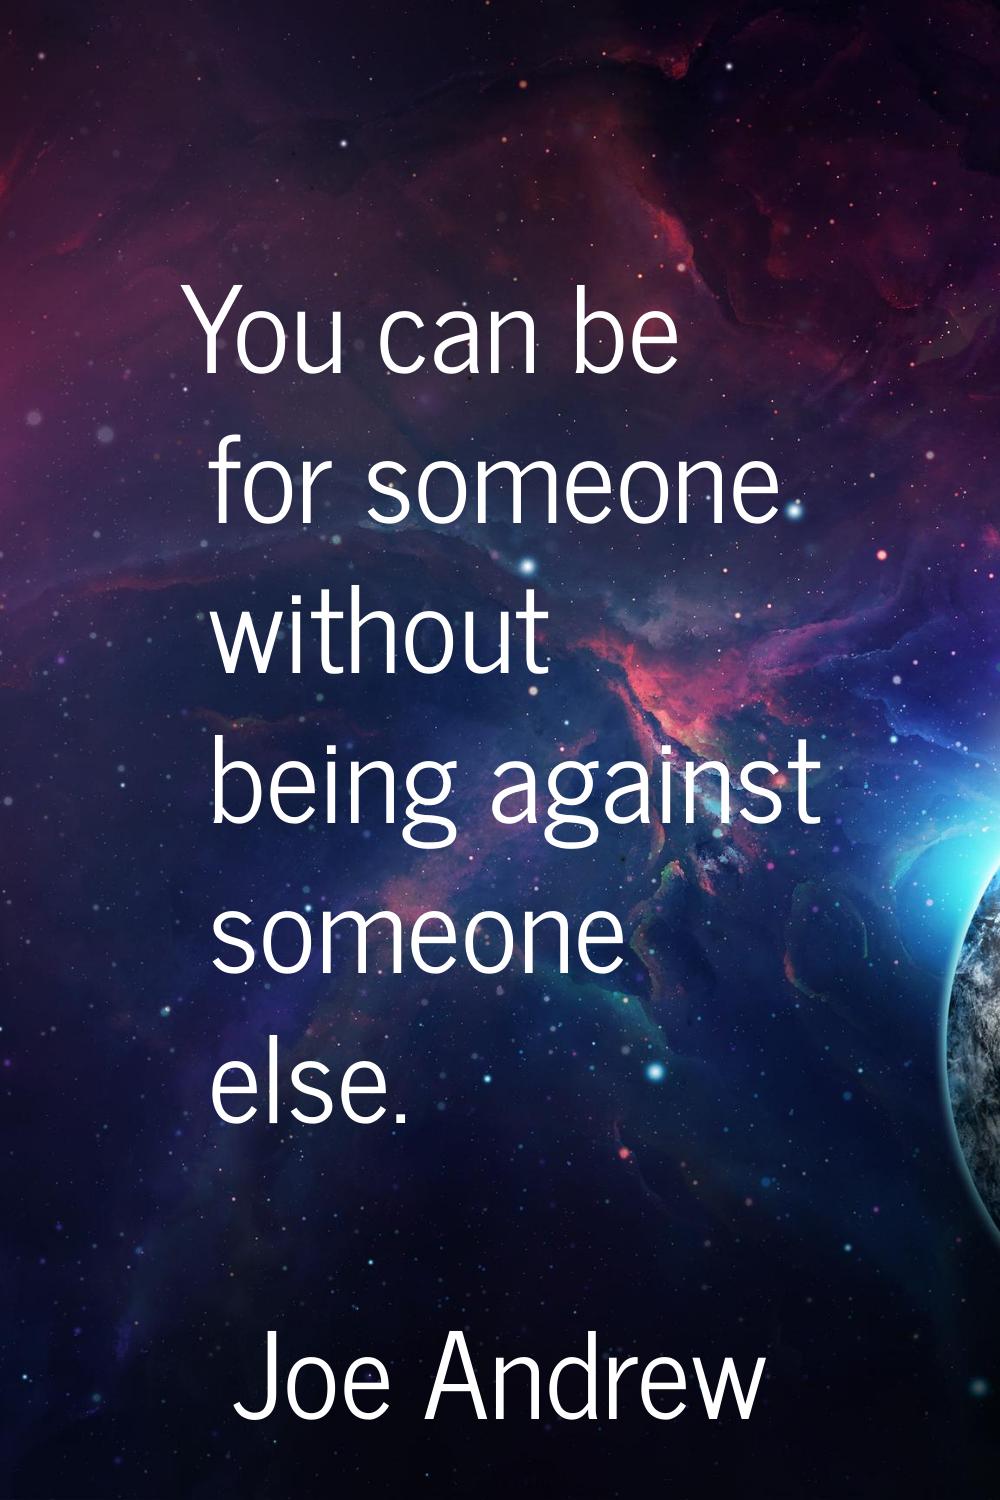 You can be for someone without being against someone else.